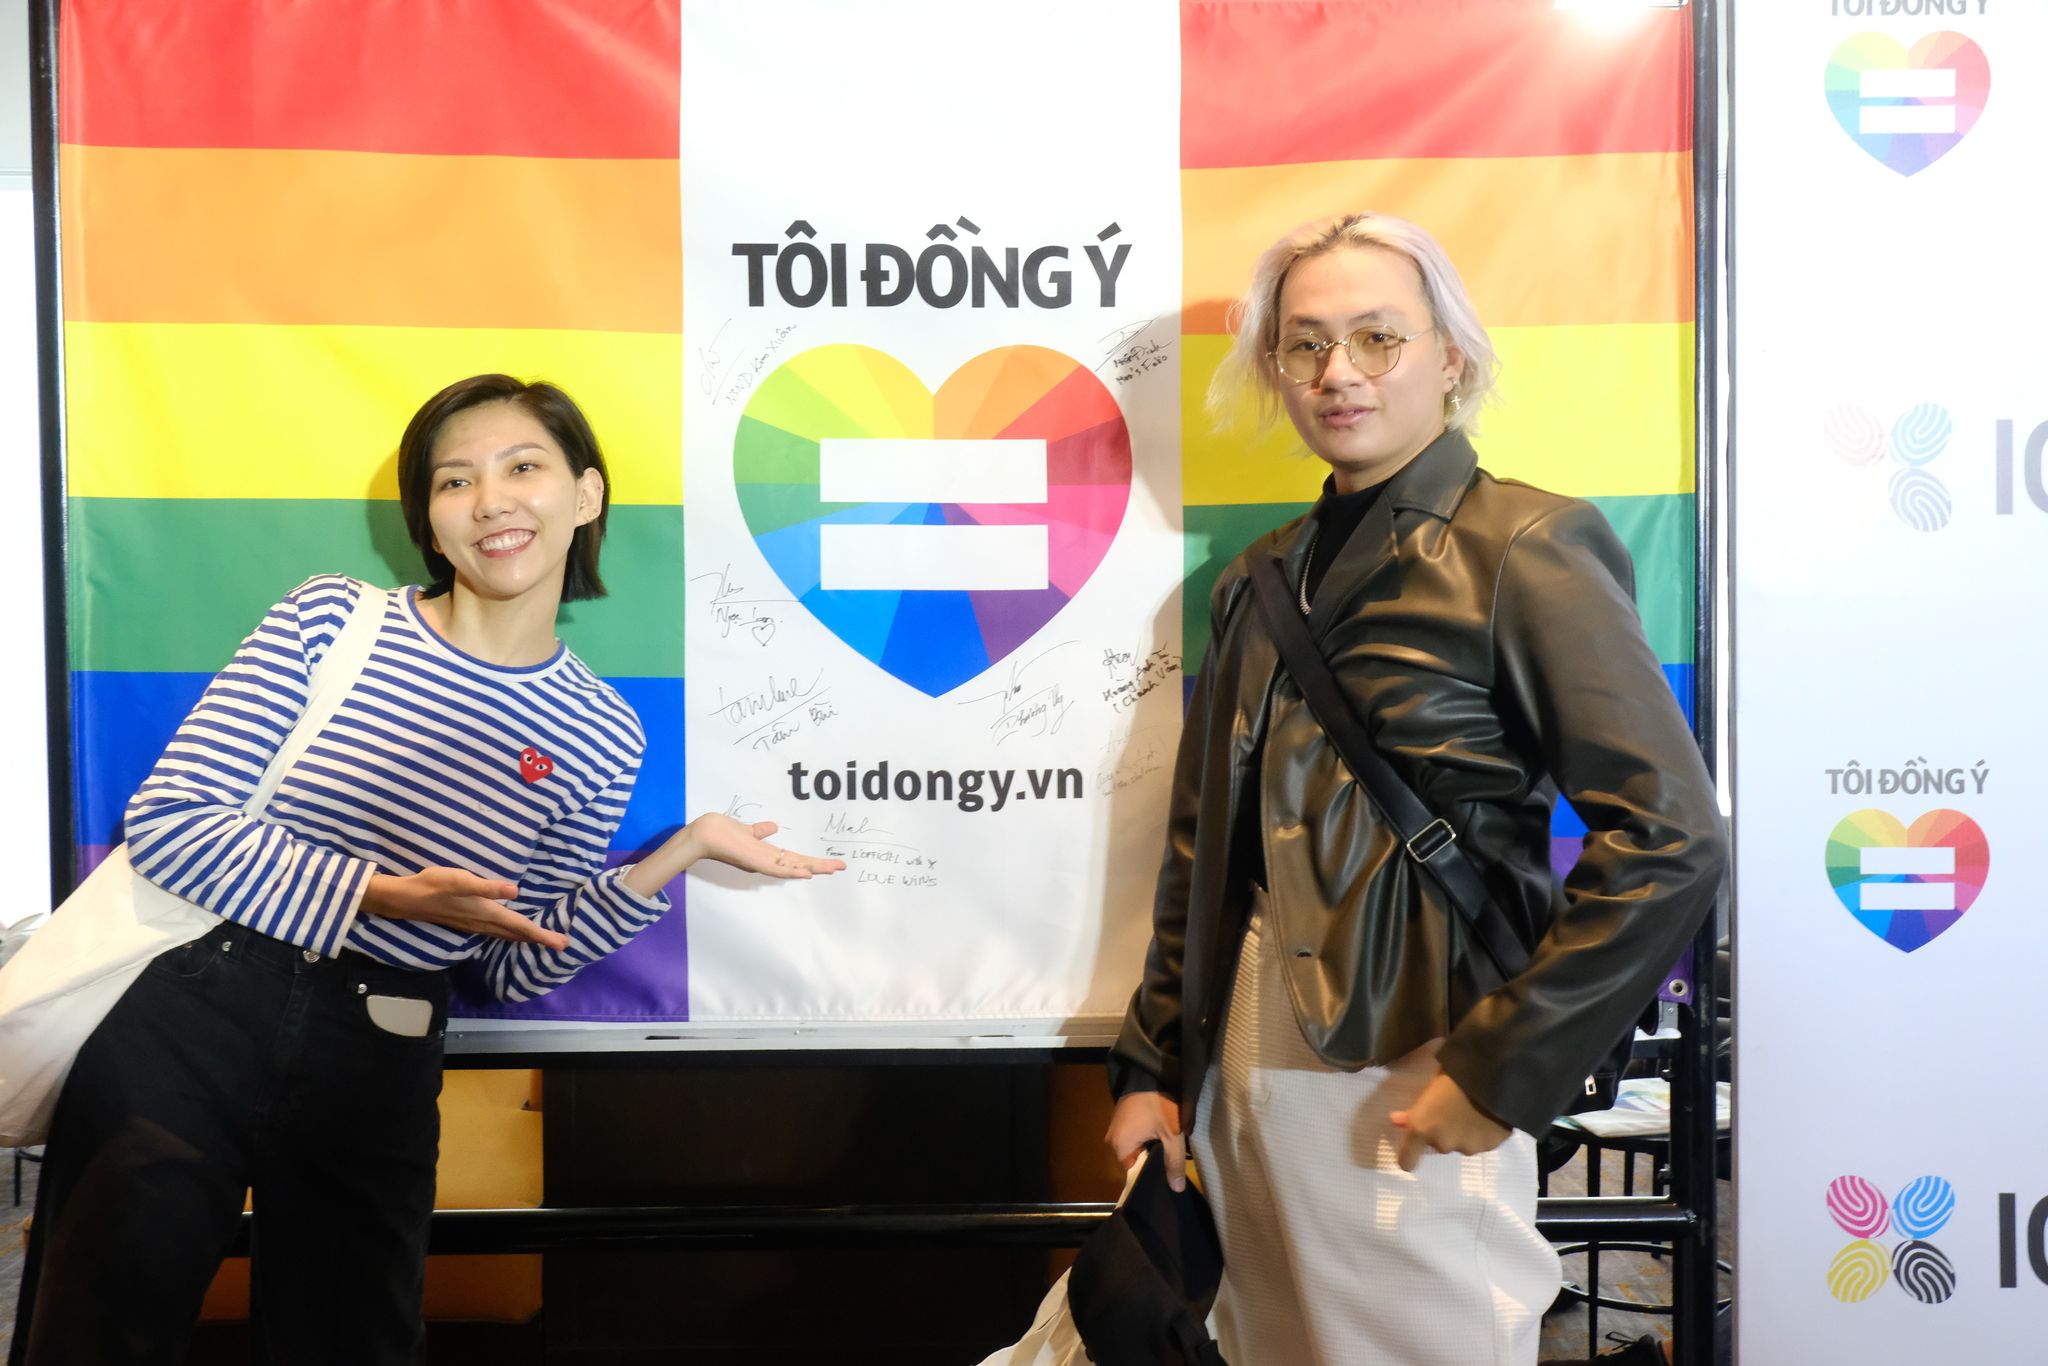 Vietnam’s LGBTI+ campaign to support same-sex marriage reboots after nearly a decade